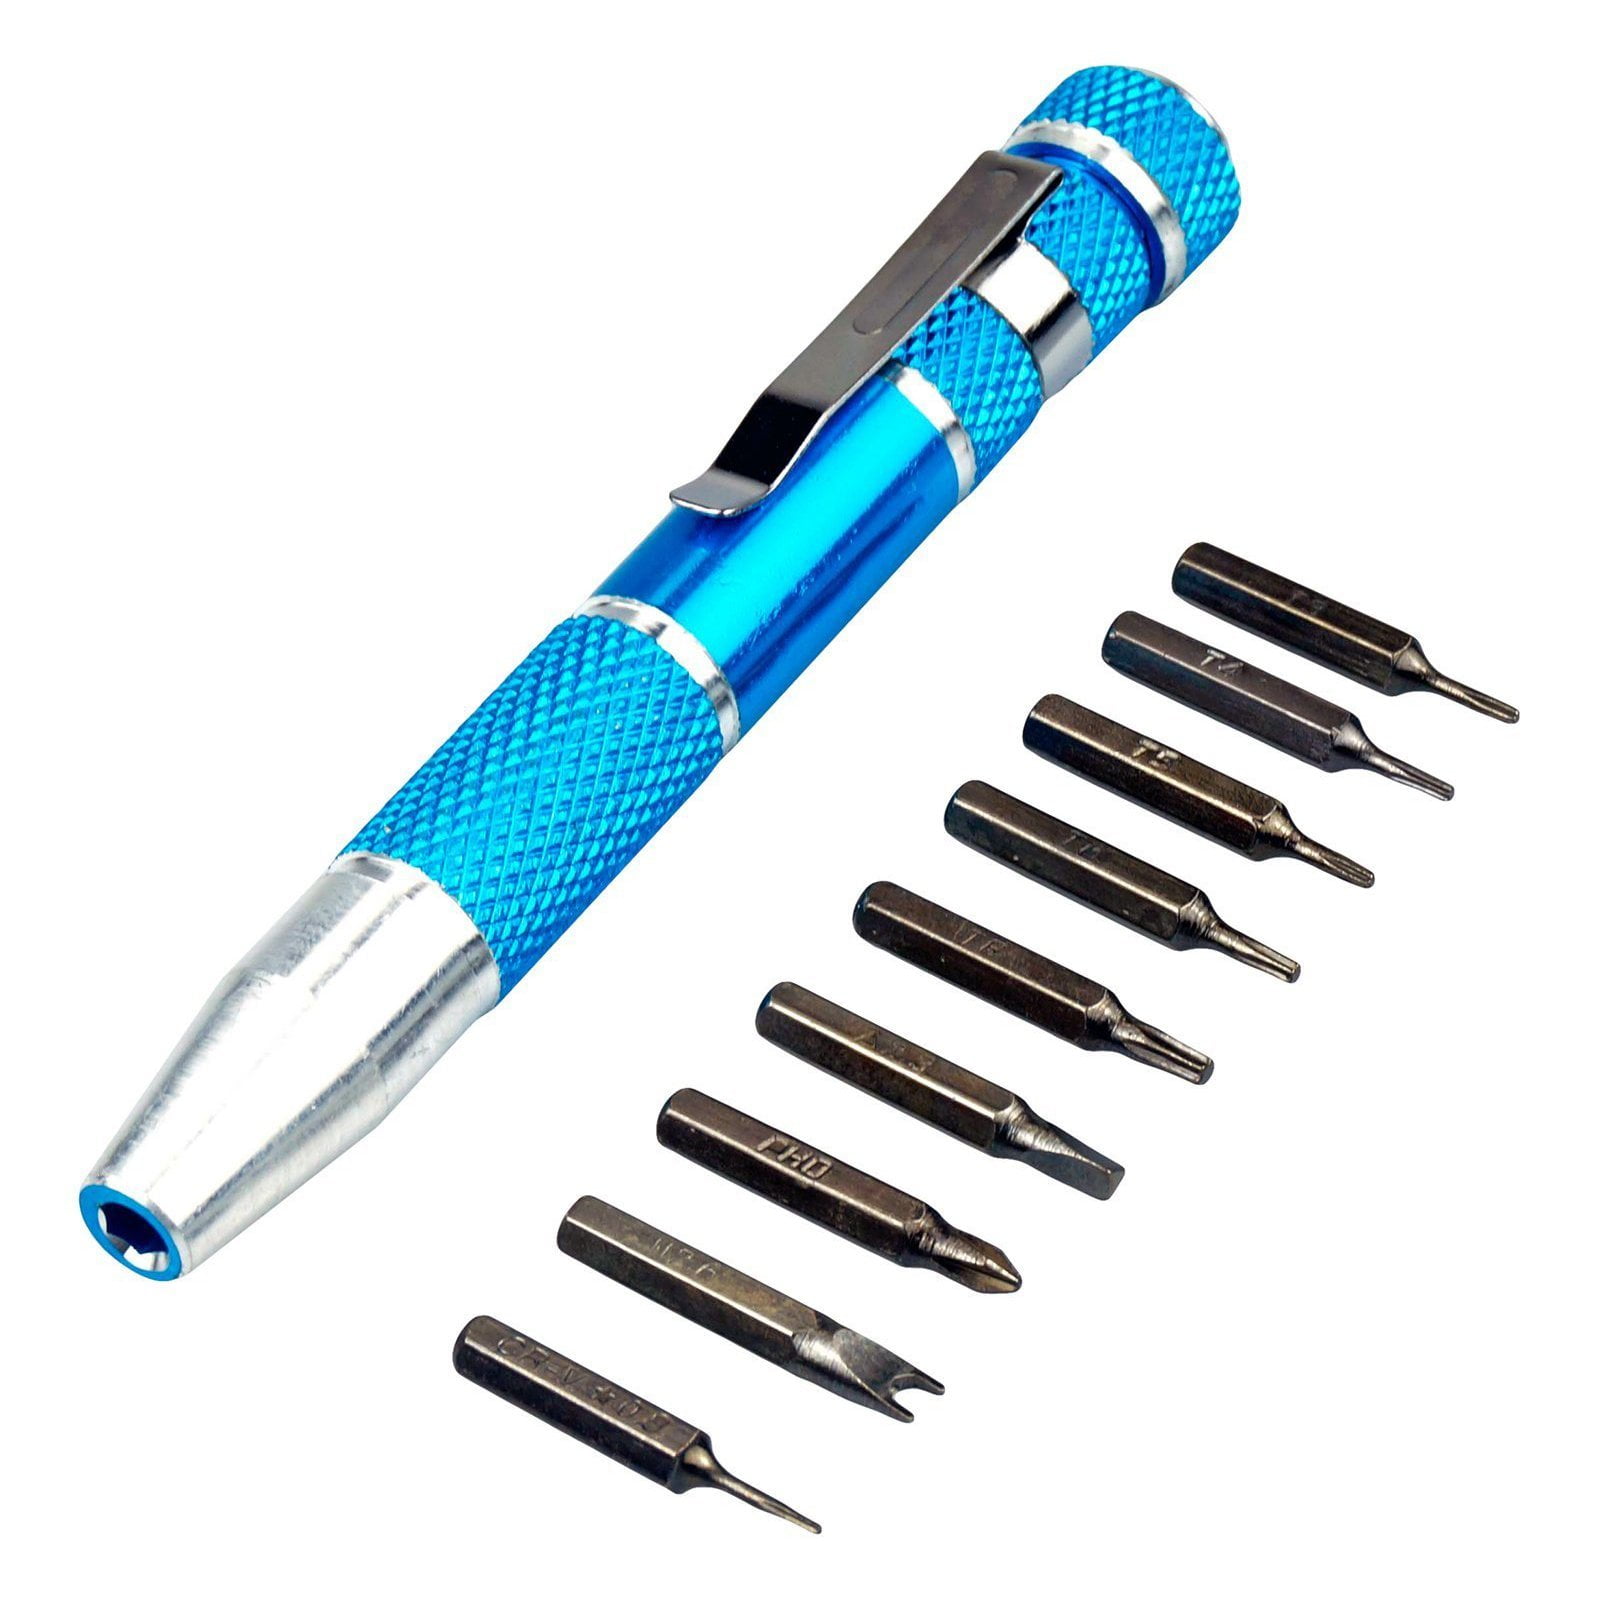 Details about   33 In 1 Magnetic Screwdriver CR-V Steel Set for Phone Tab Laptop Gamebox PC 